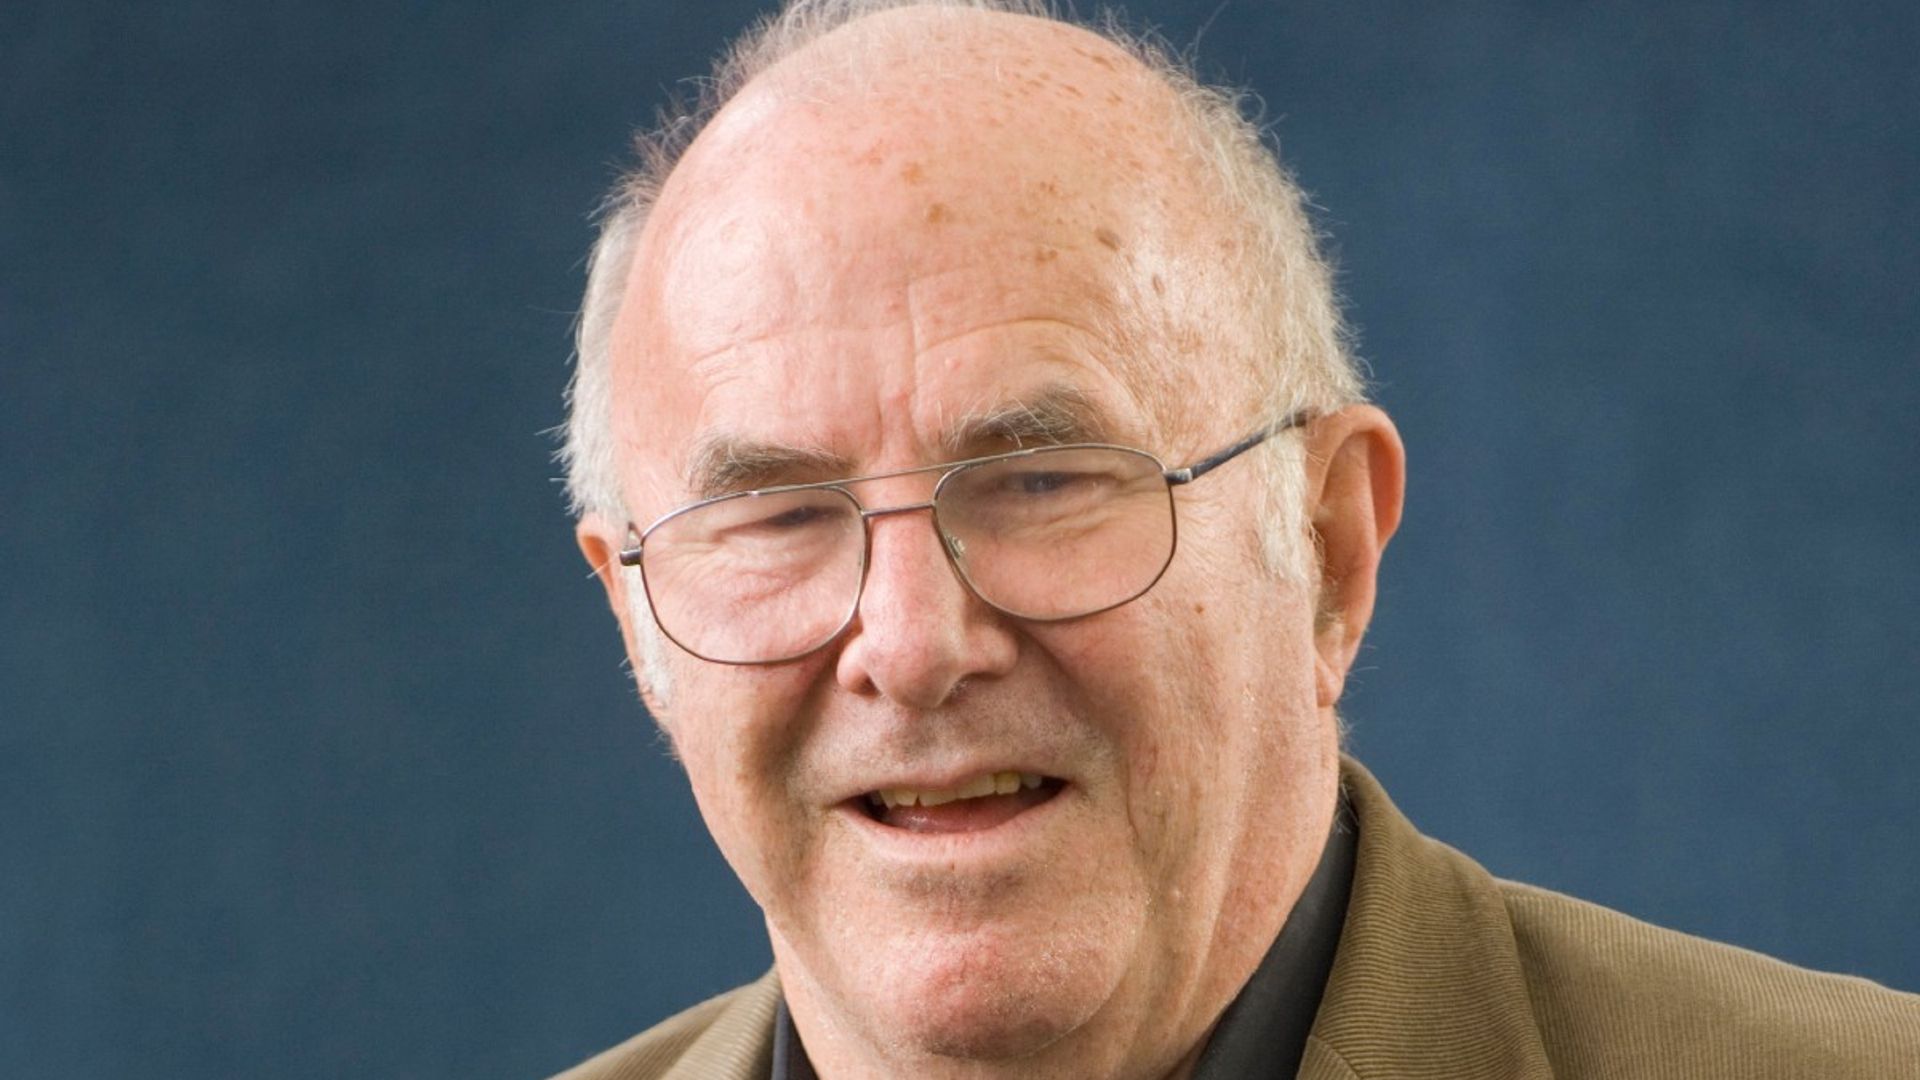 clive-james-open-mouth-t.jpg